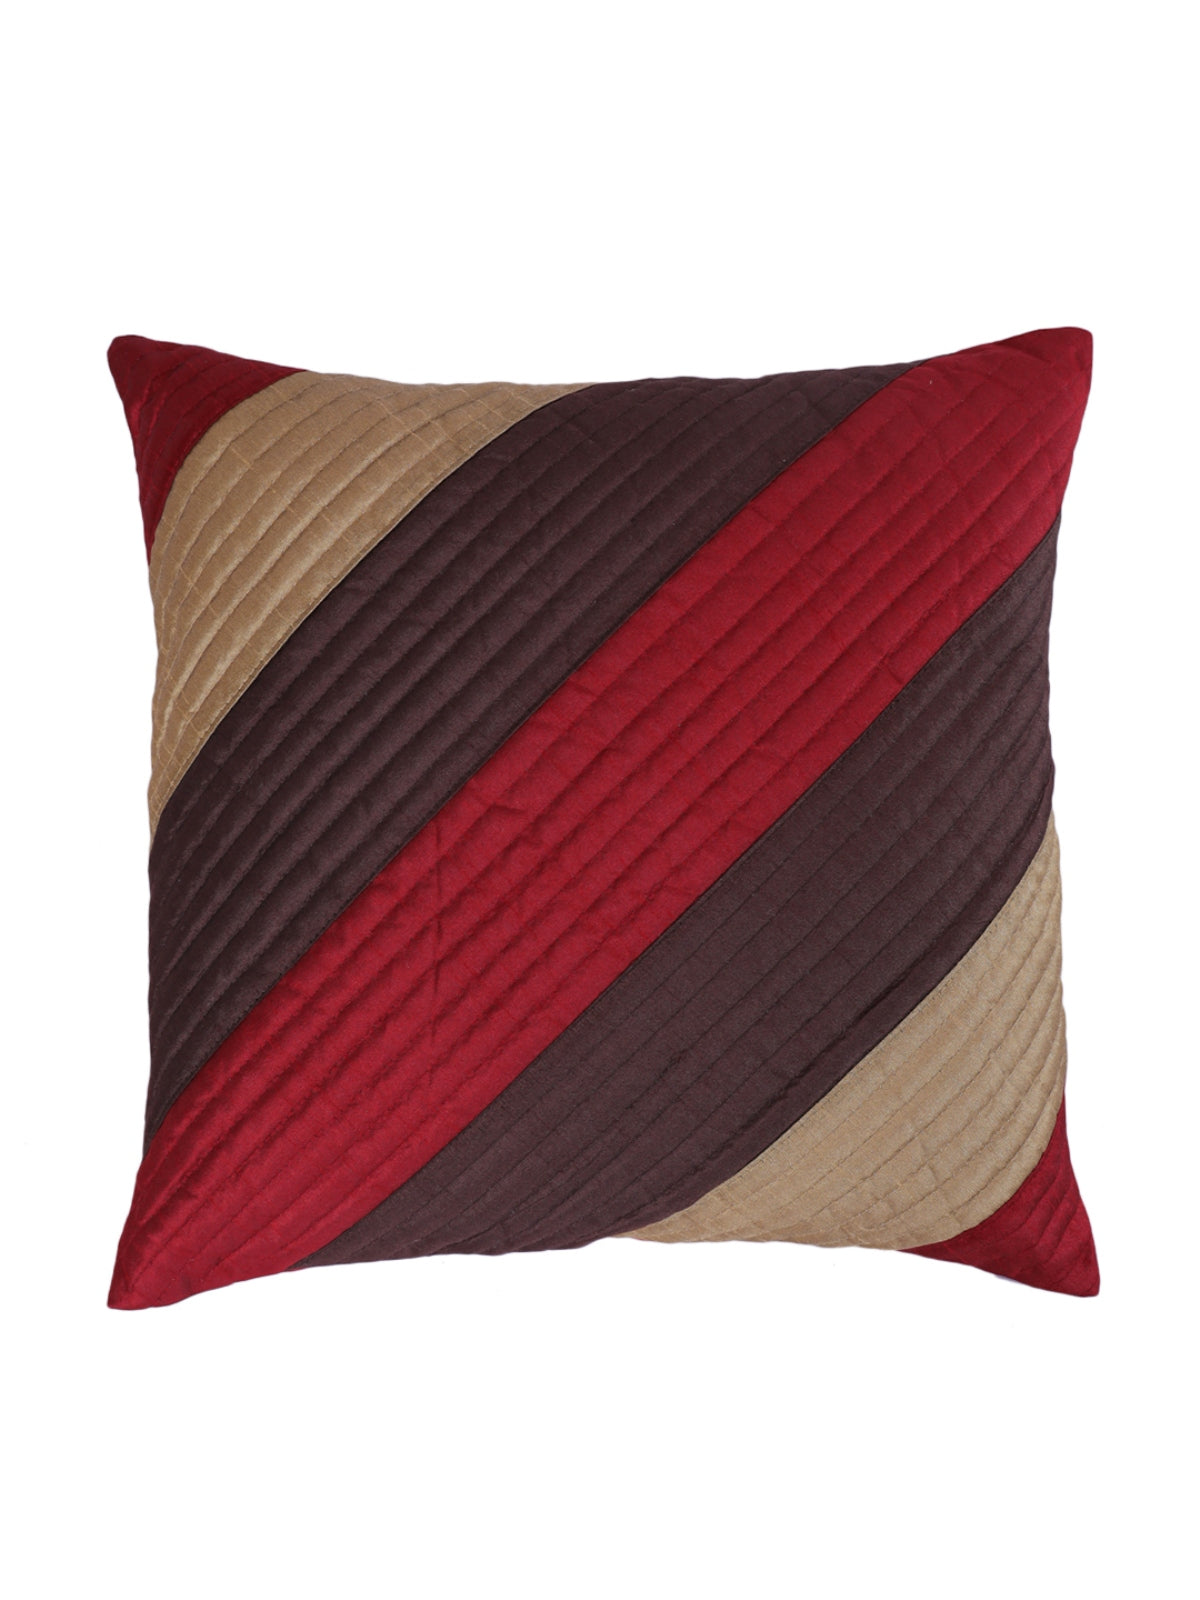 Striped Printed Polyester Cushion Cover Set of 5 - Brown & Beige